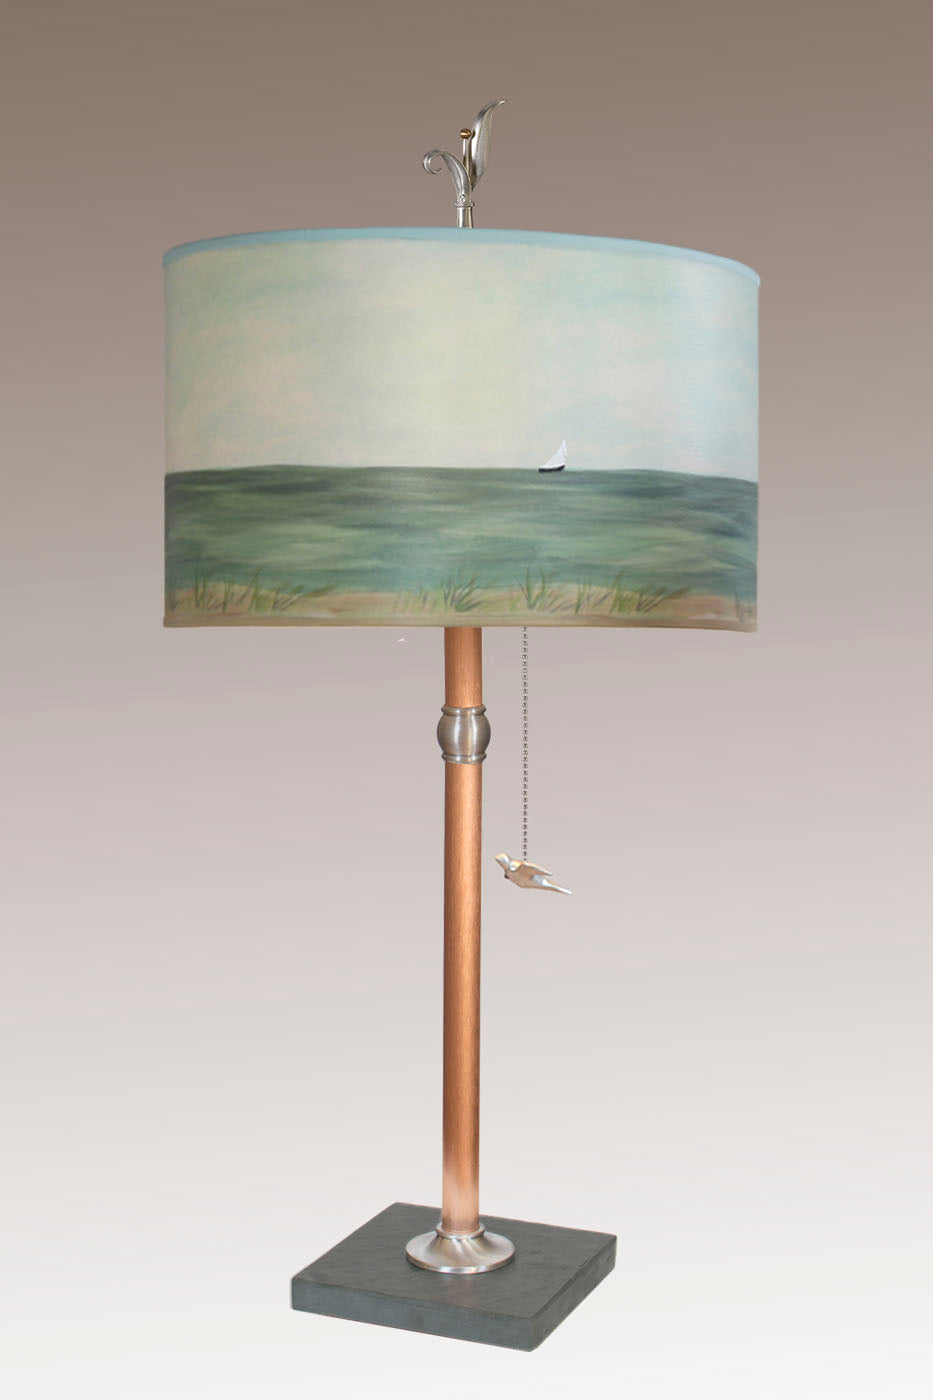 Janna Ugone &amp; Co Table Lamps Copper Table Lamp with Large Drum Shade in Shore